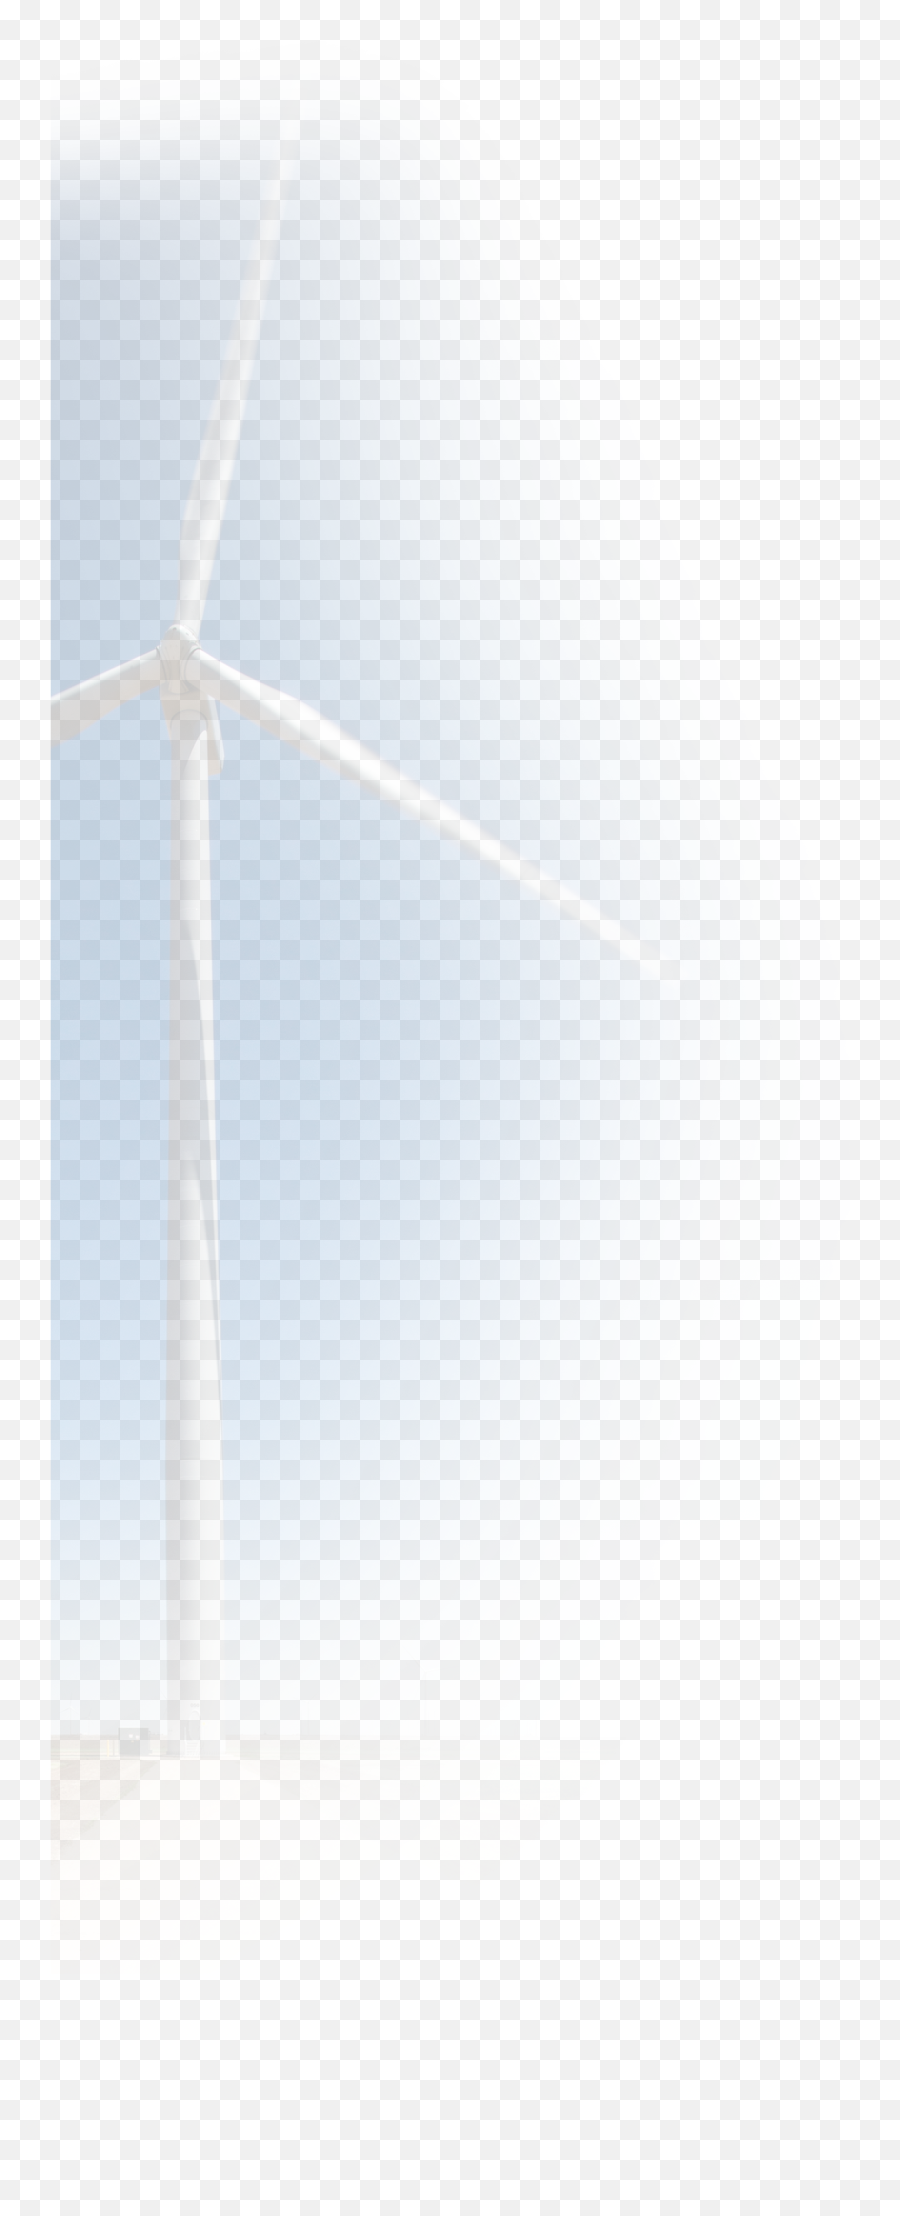 Wind Turbine Png Image - Wind Turbine,Wind Turbine Png